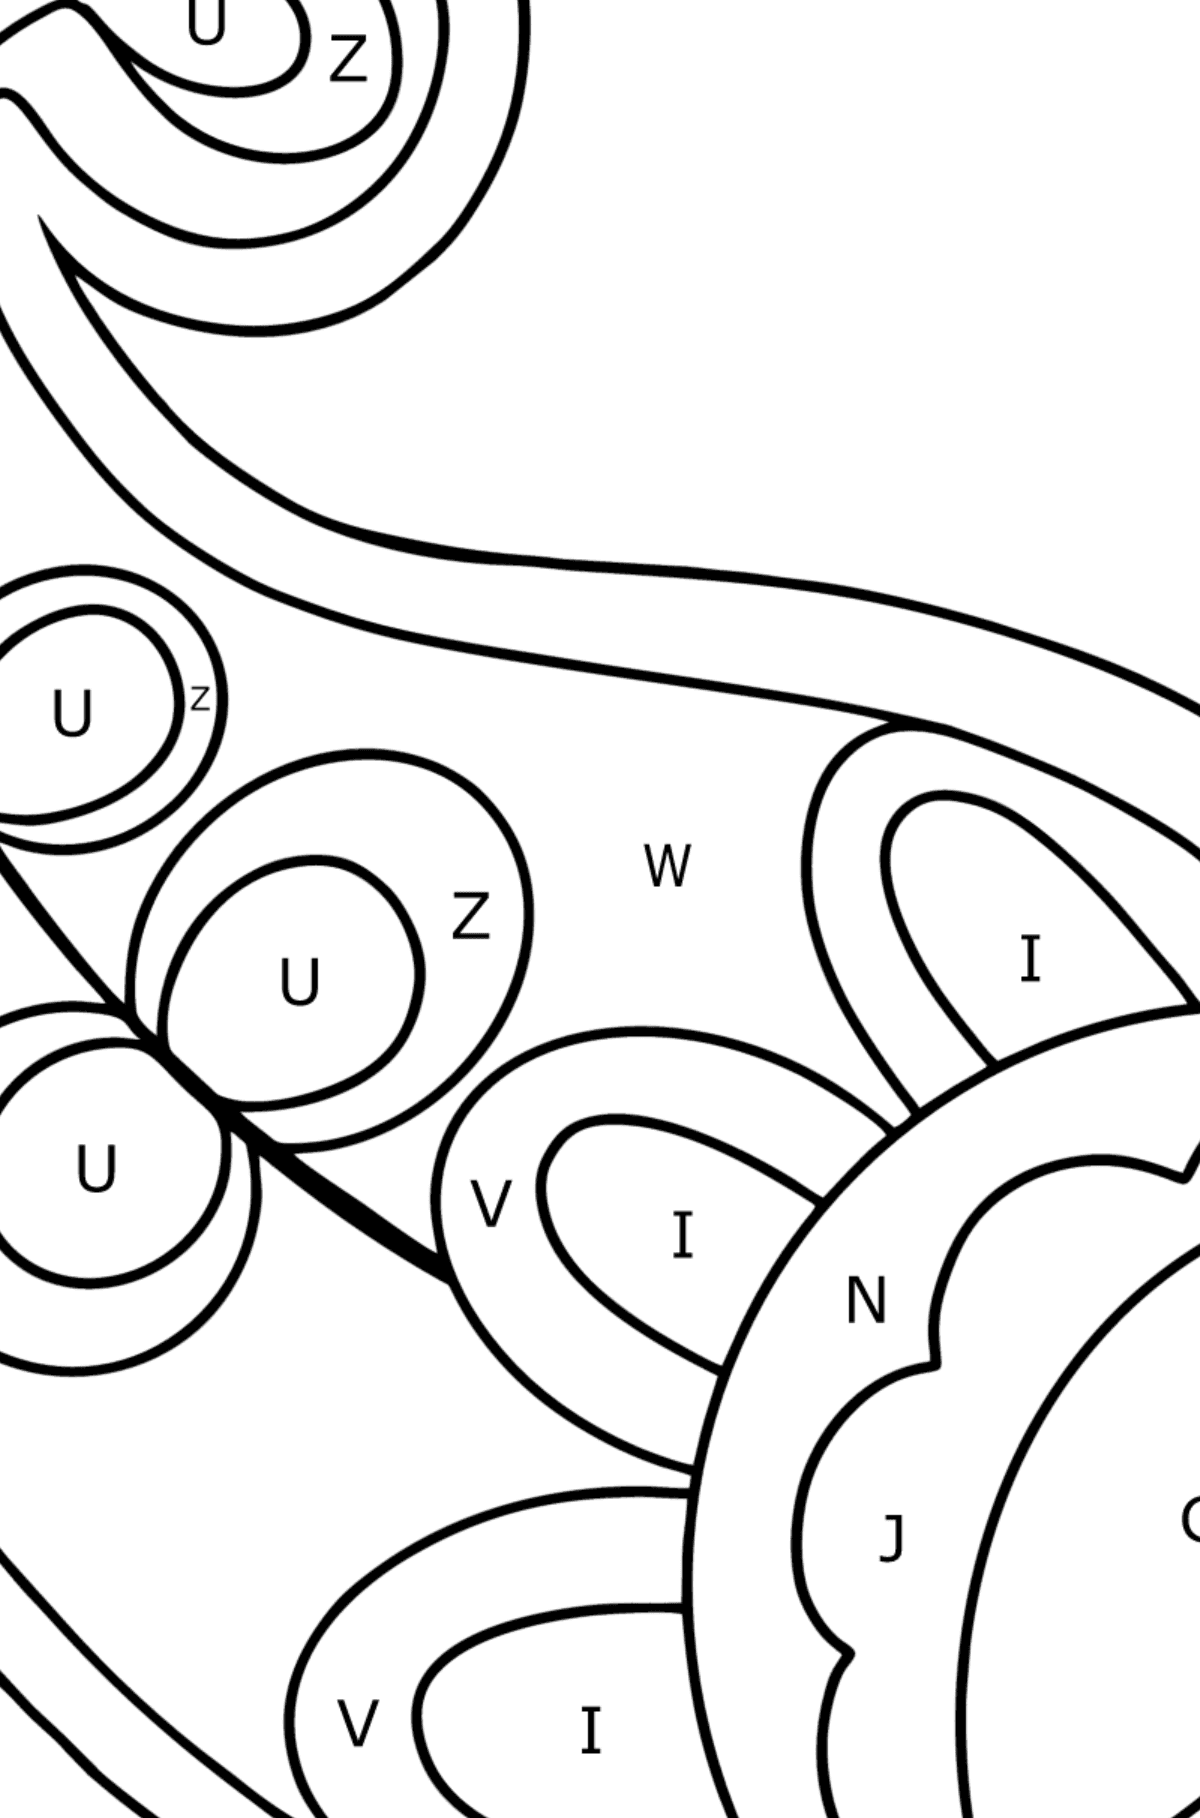 Paisley coloring page for Kids - Coloring by Letters for Kids